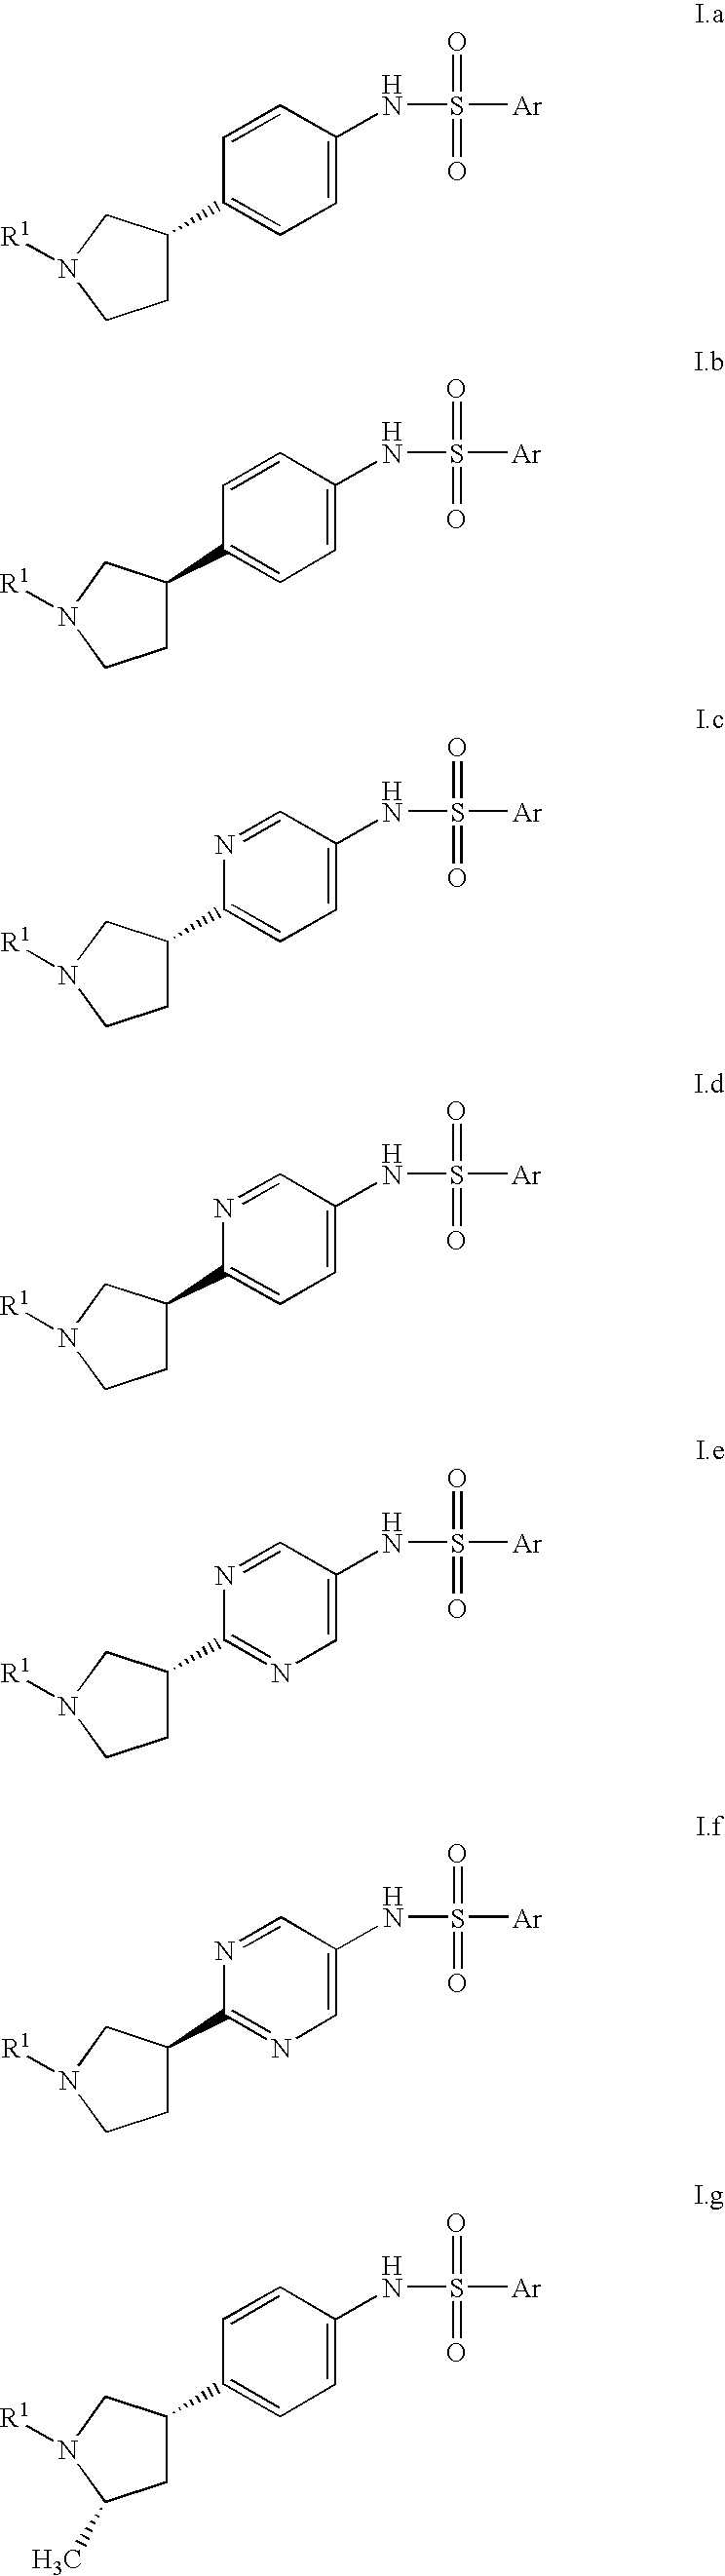 Heterocyclic compounds suitable for treating disorders that respond to modulation of the dopamine D<sub>3 </sub>receptor